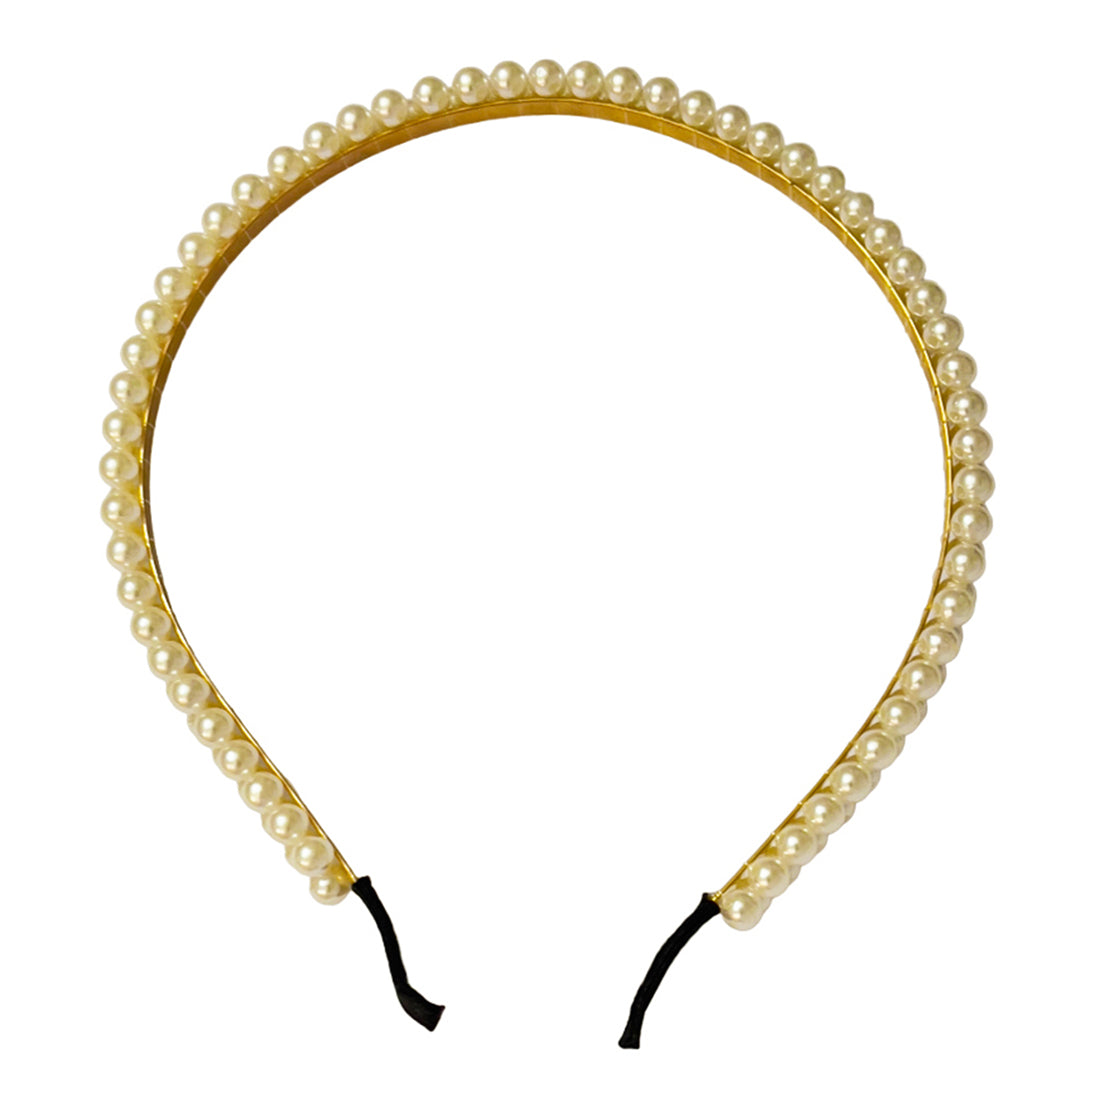 White Pearls Studded with Gold Wire Wrapped Gold-Toned Hairband